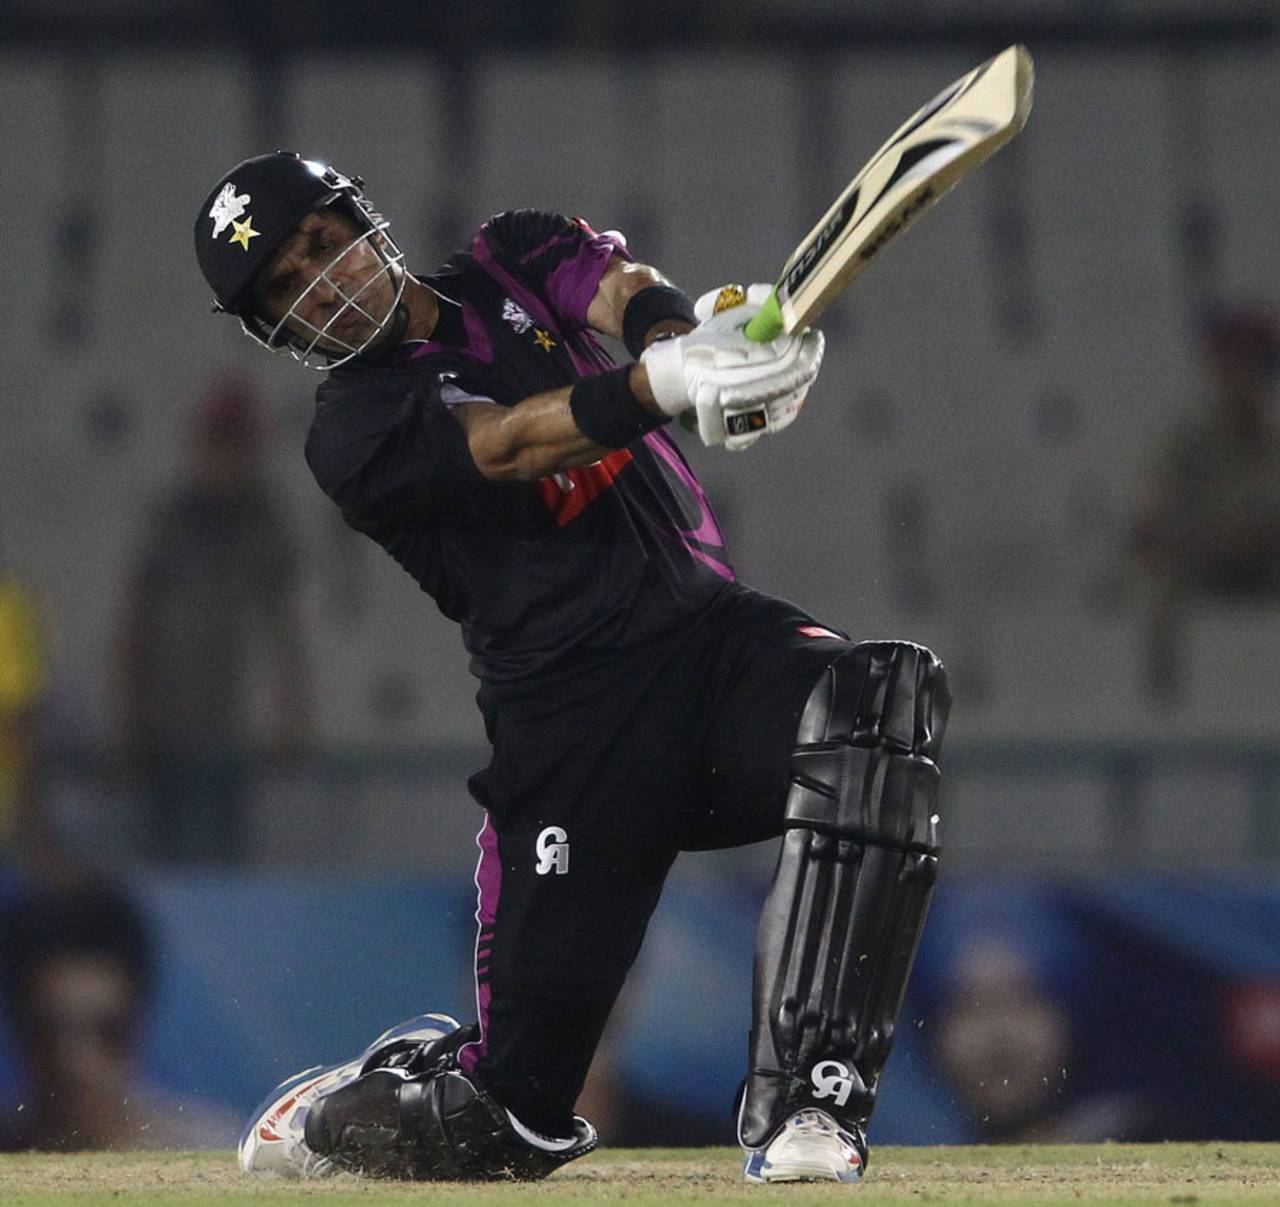 Misbah-ul-Haq's 56 took Faisalabad to 127, Faisalabad Wolves v Sunrisers Hyderabad, Champions League Qualifiers, Mohali, September 18, 2013